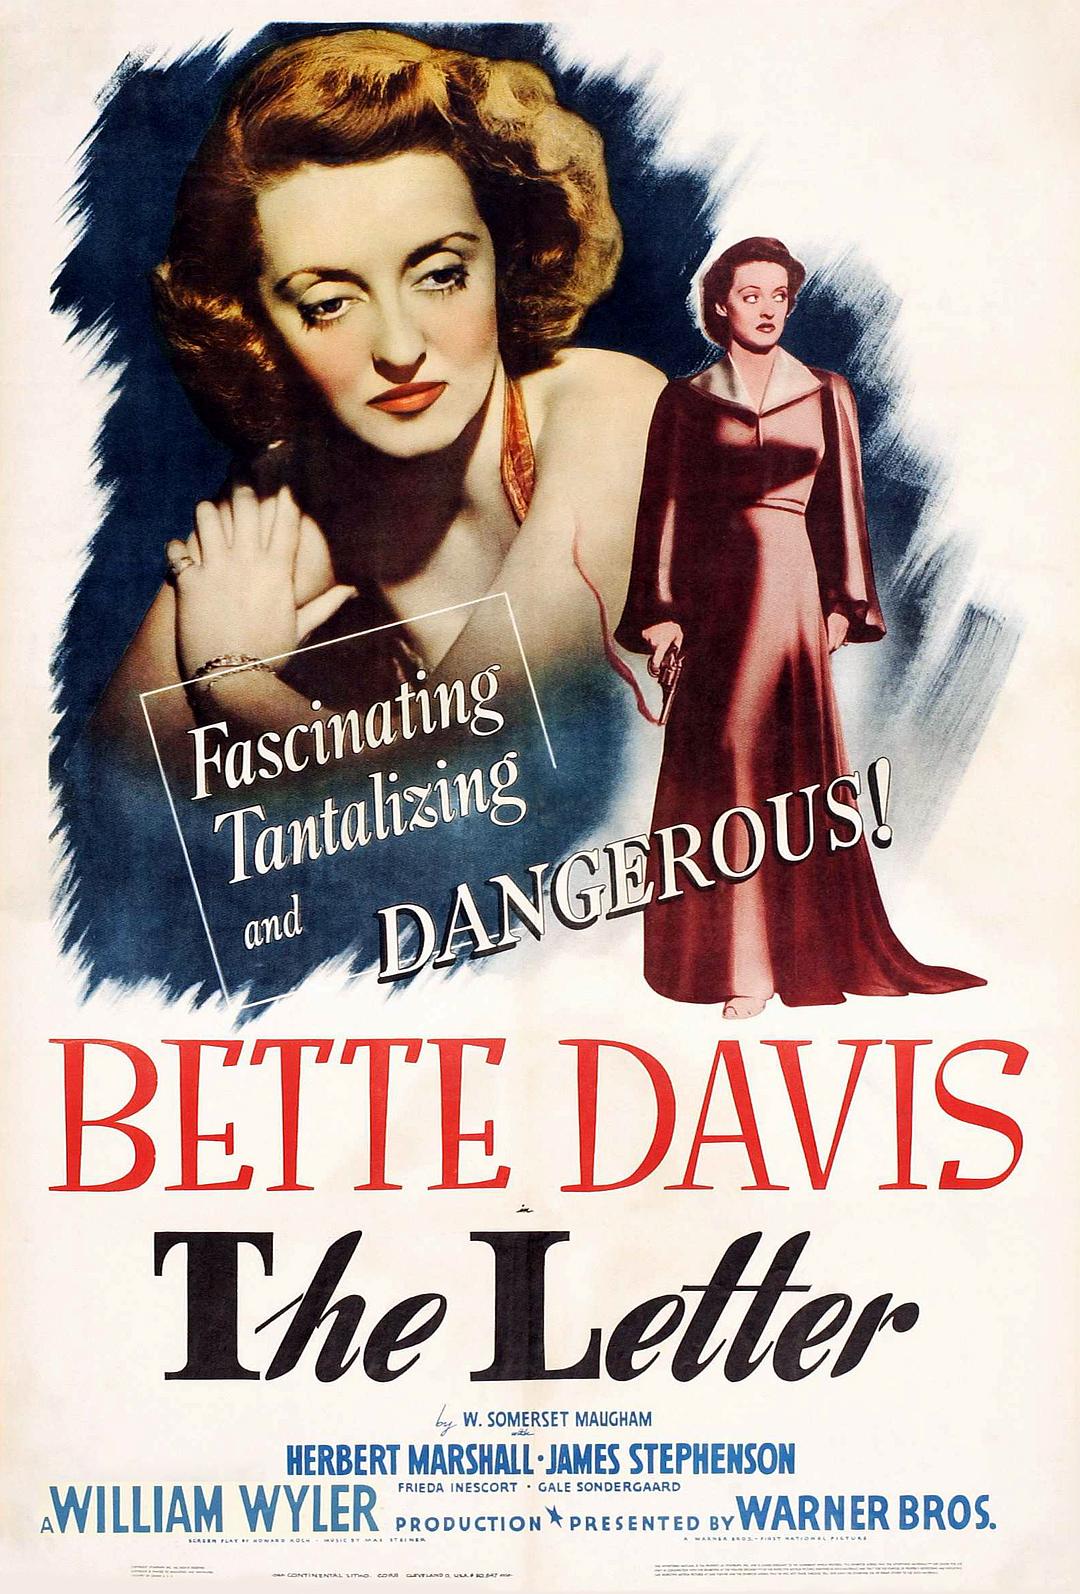  The.Letter.1940.720p.BluRay.x264-SiNNERS 4.38GB-1.png